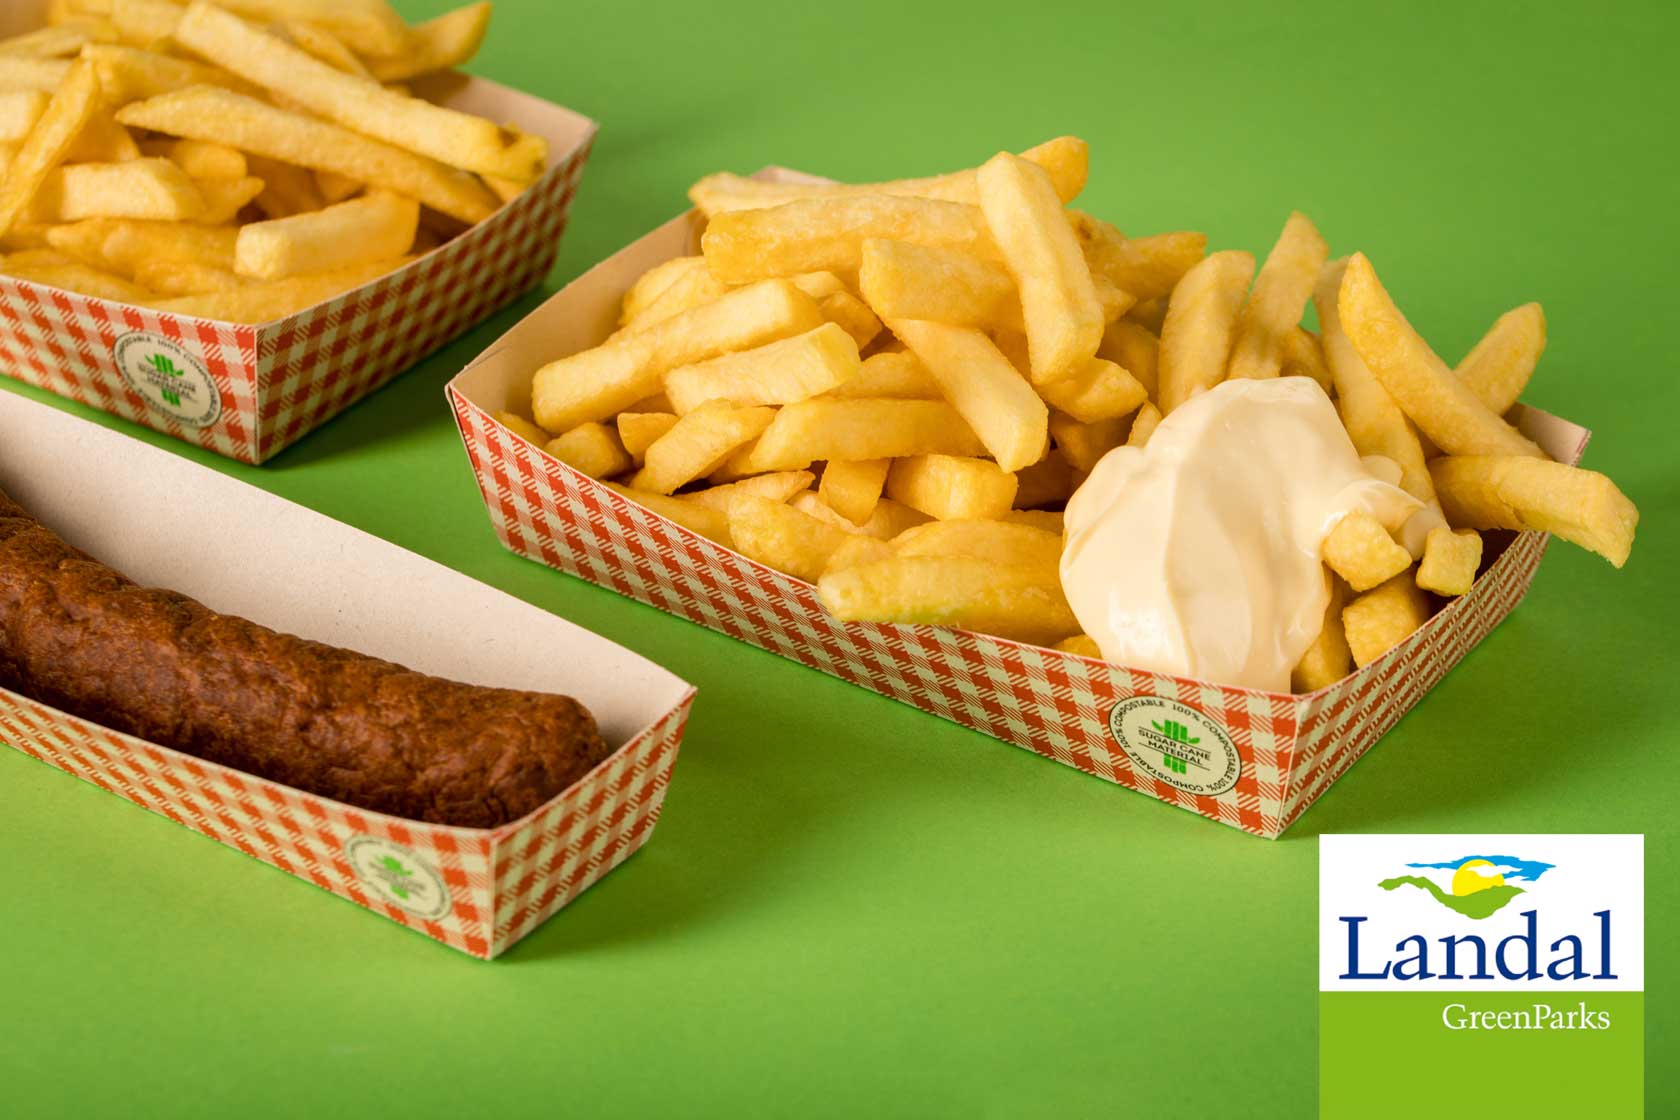 Ethical packaging for fried foods